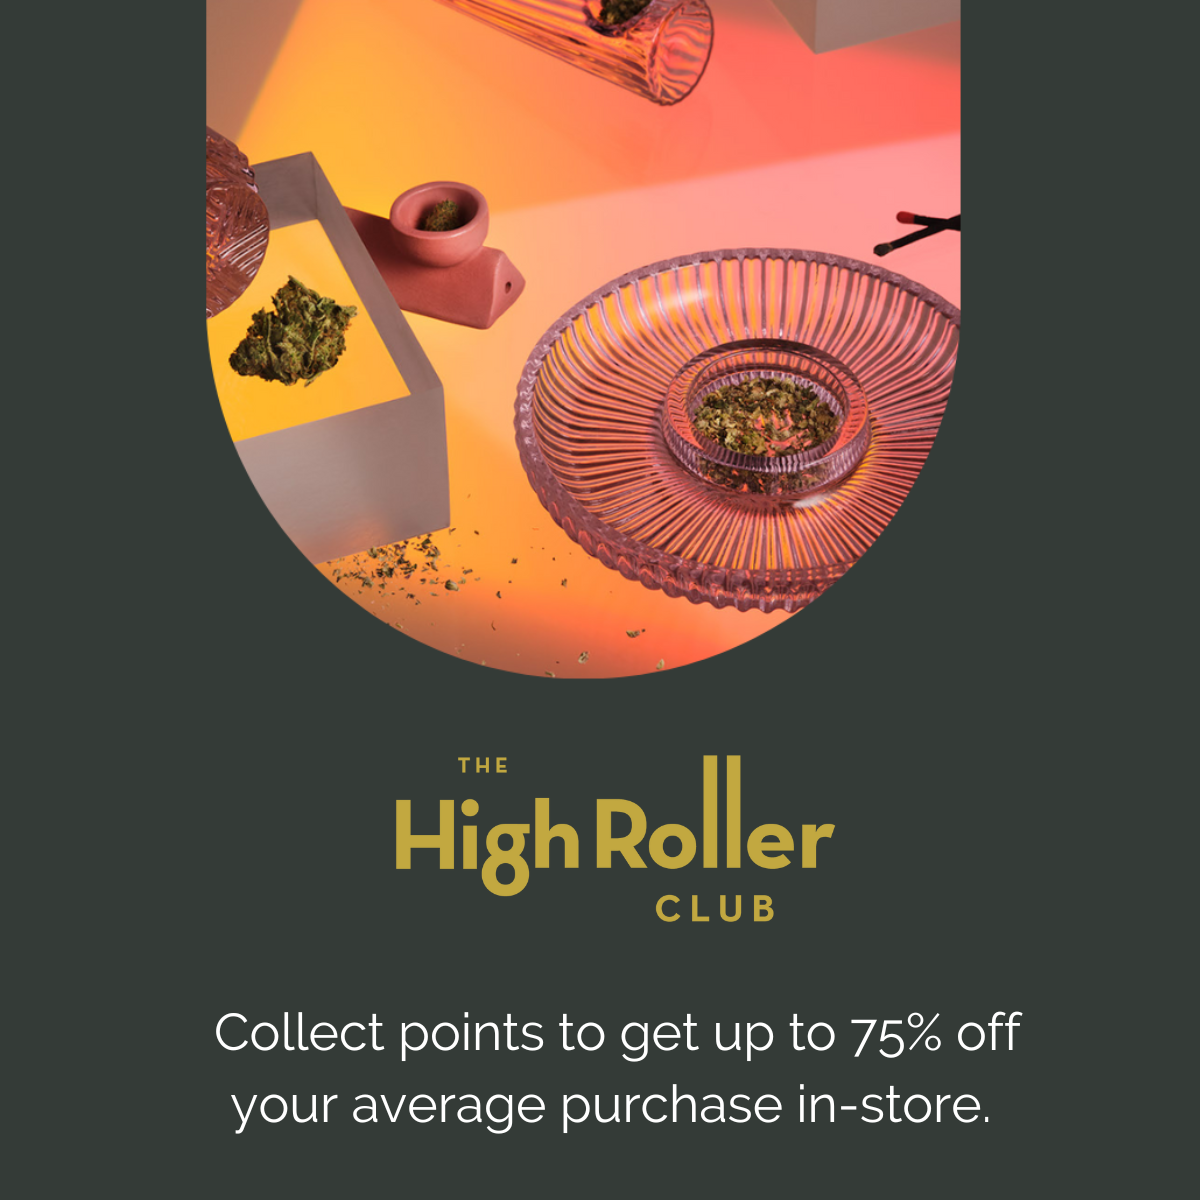 The High Roller Club. Collect points to get up to 75% off your average purchase in-store.